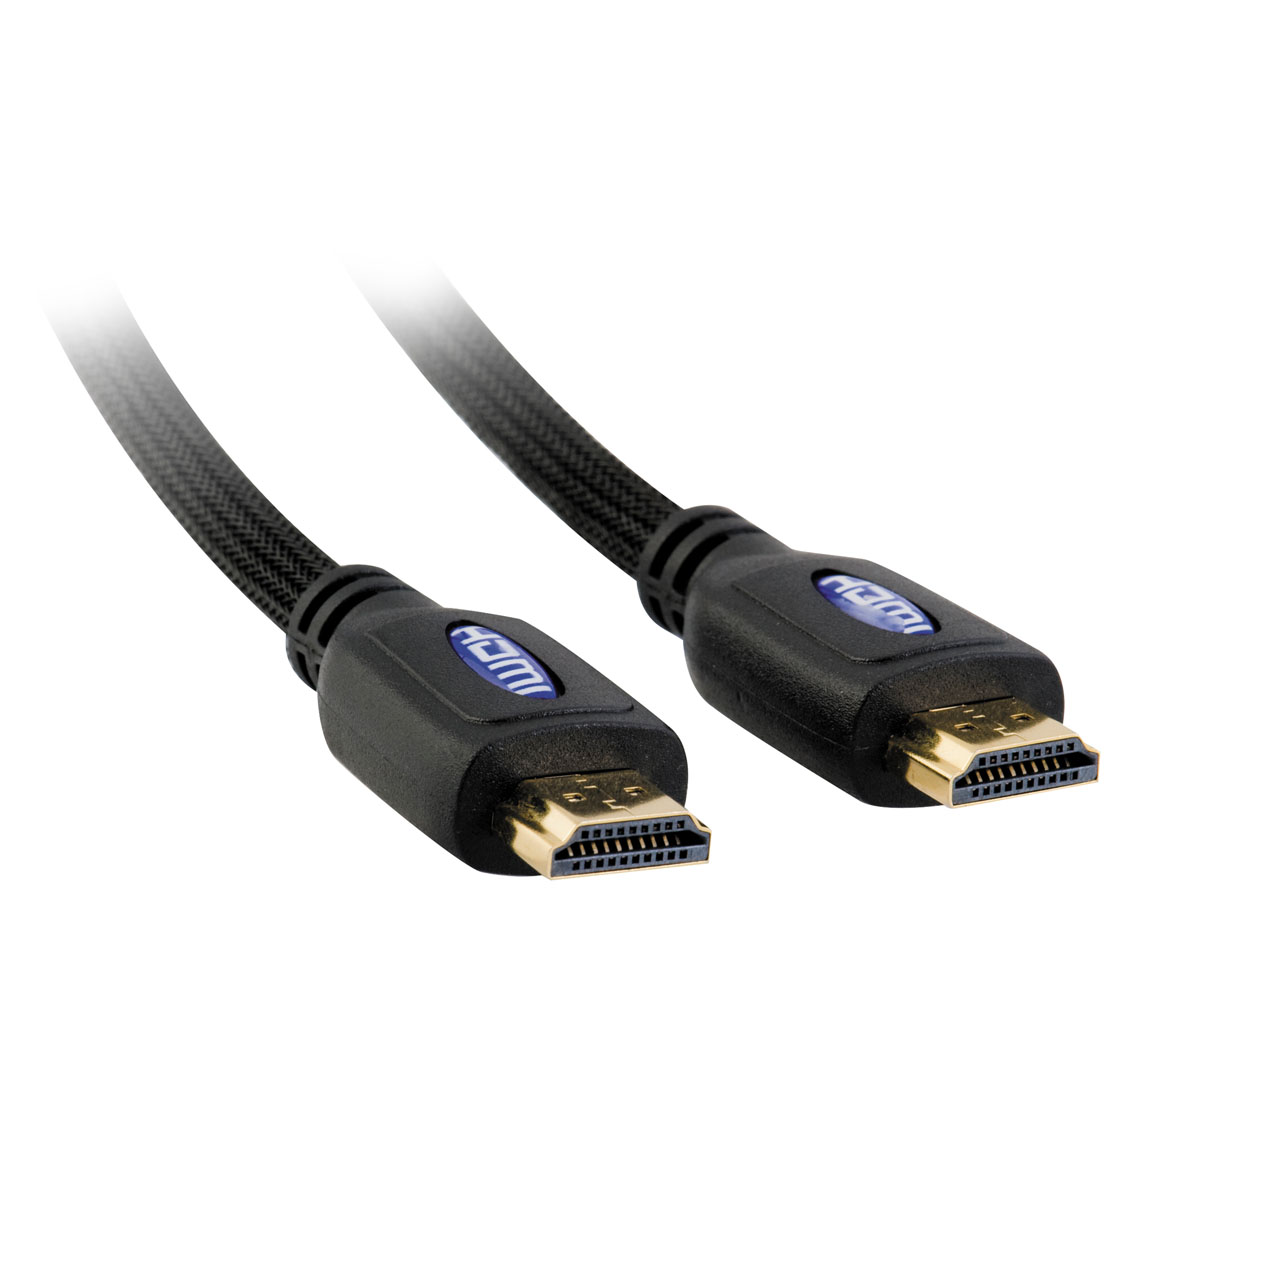 HDMI Cable V1.4 3m - UK